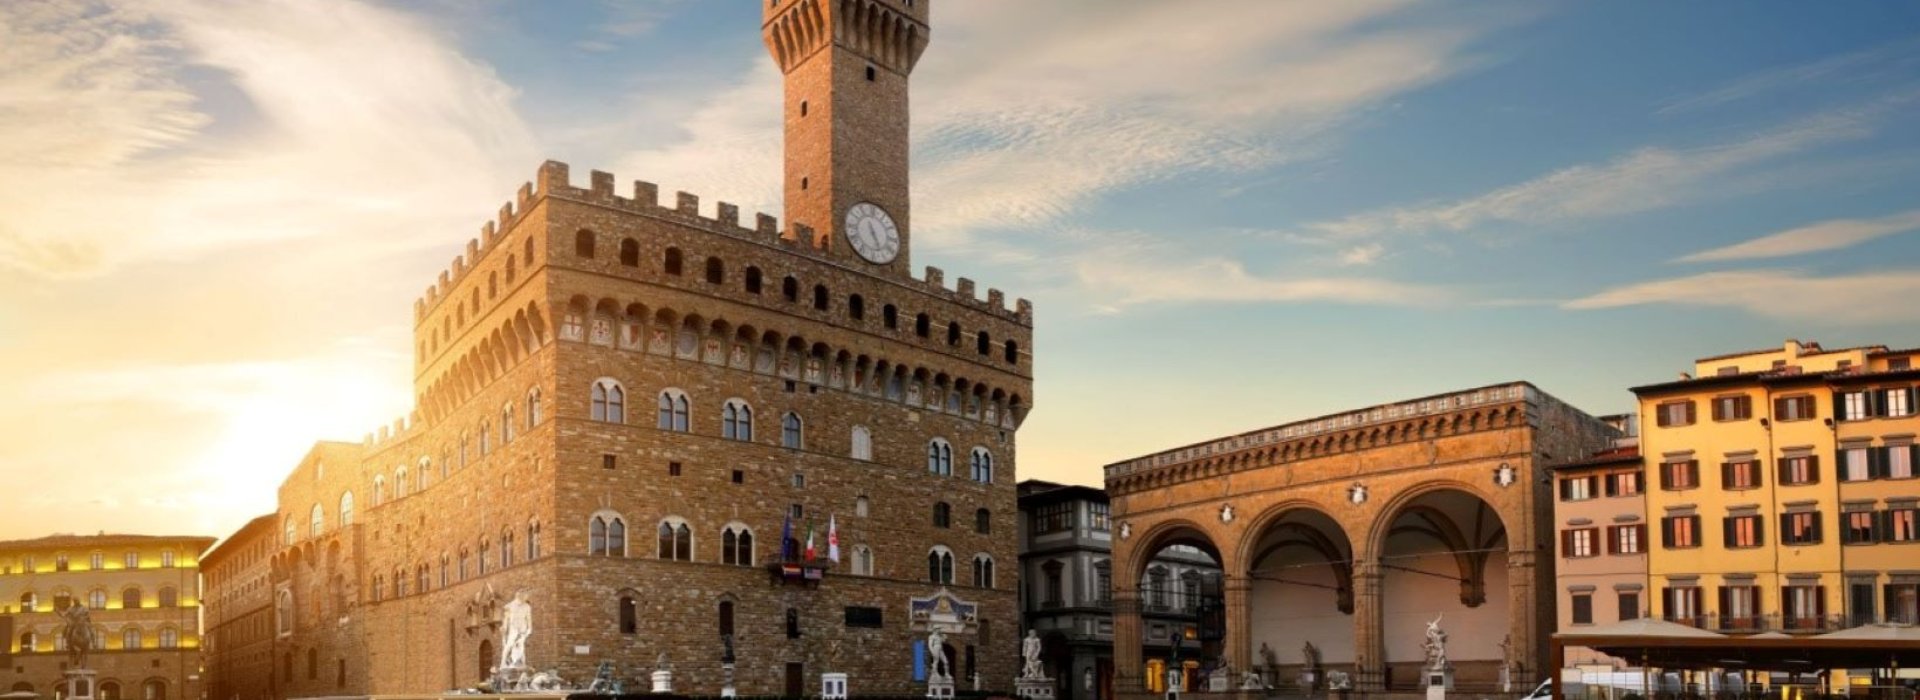 A tour of Florence designed to let you know details and unusual aspects of the city